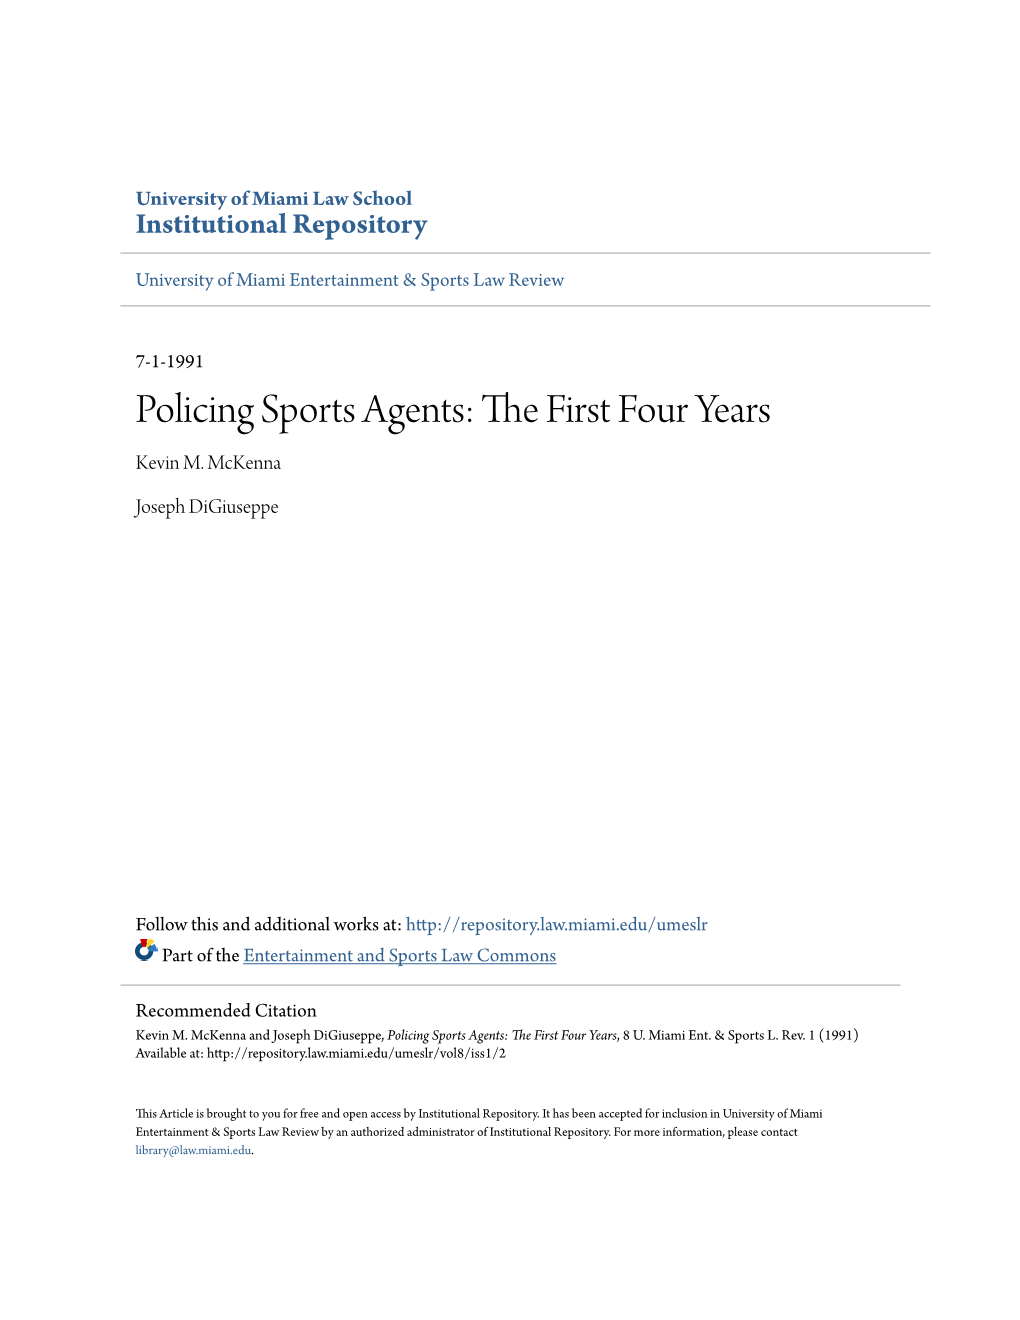 Policing Sports Agents: the Irsf T Four Years Kevin M